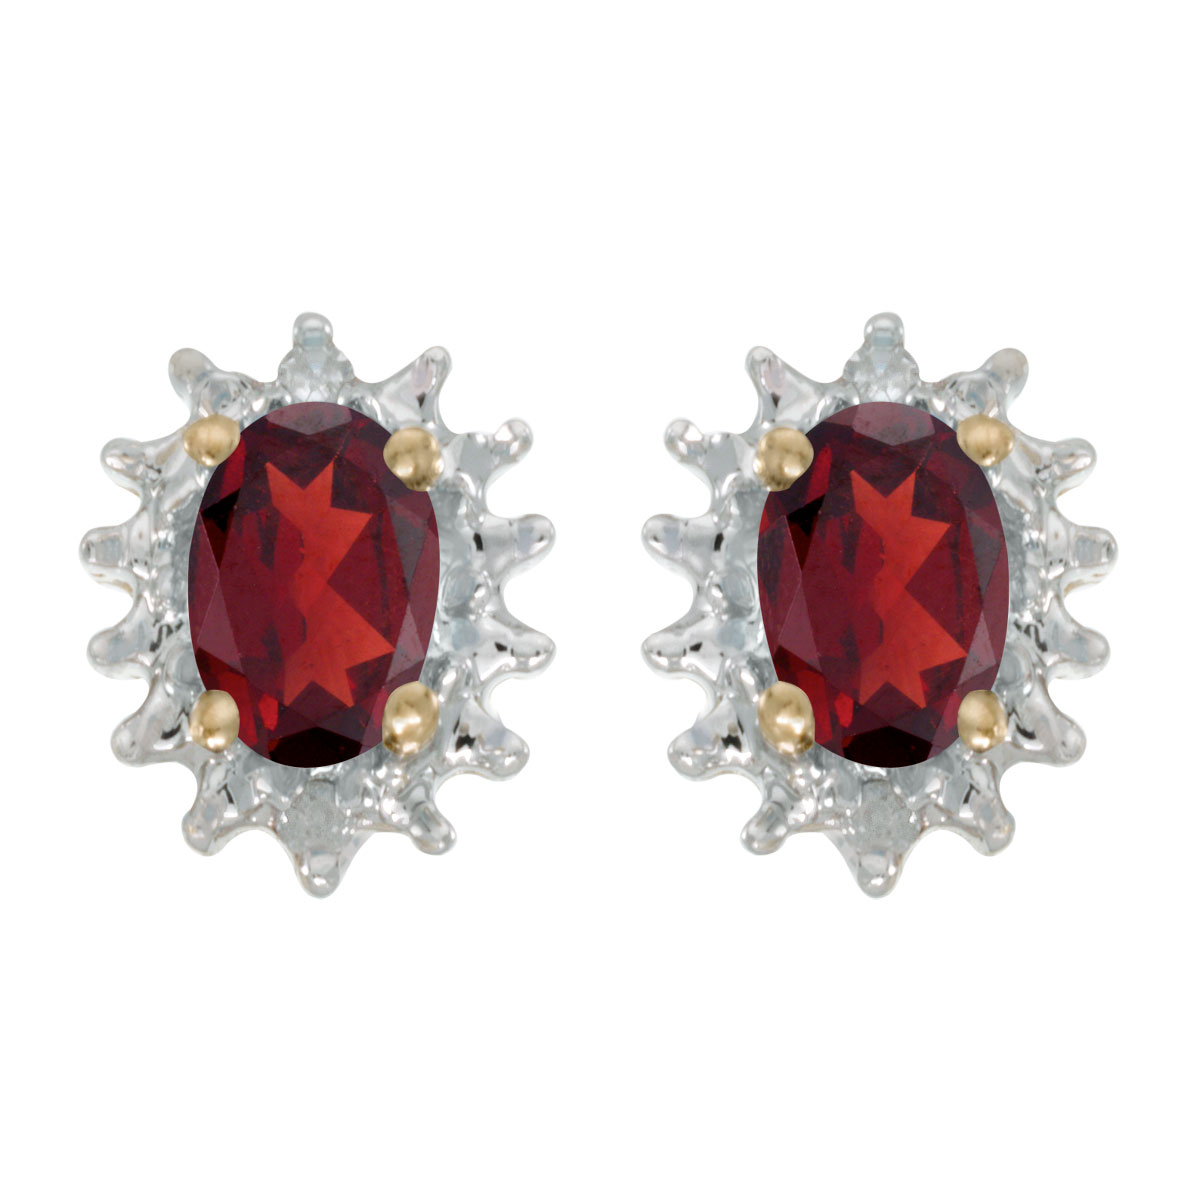 JCX1989: These 14k yellow gold oval garnet and diamond earrings feature 6x4 mm genuine natural garnets with a 0.94 ct total weight and .04 ct diamonds.